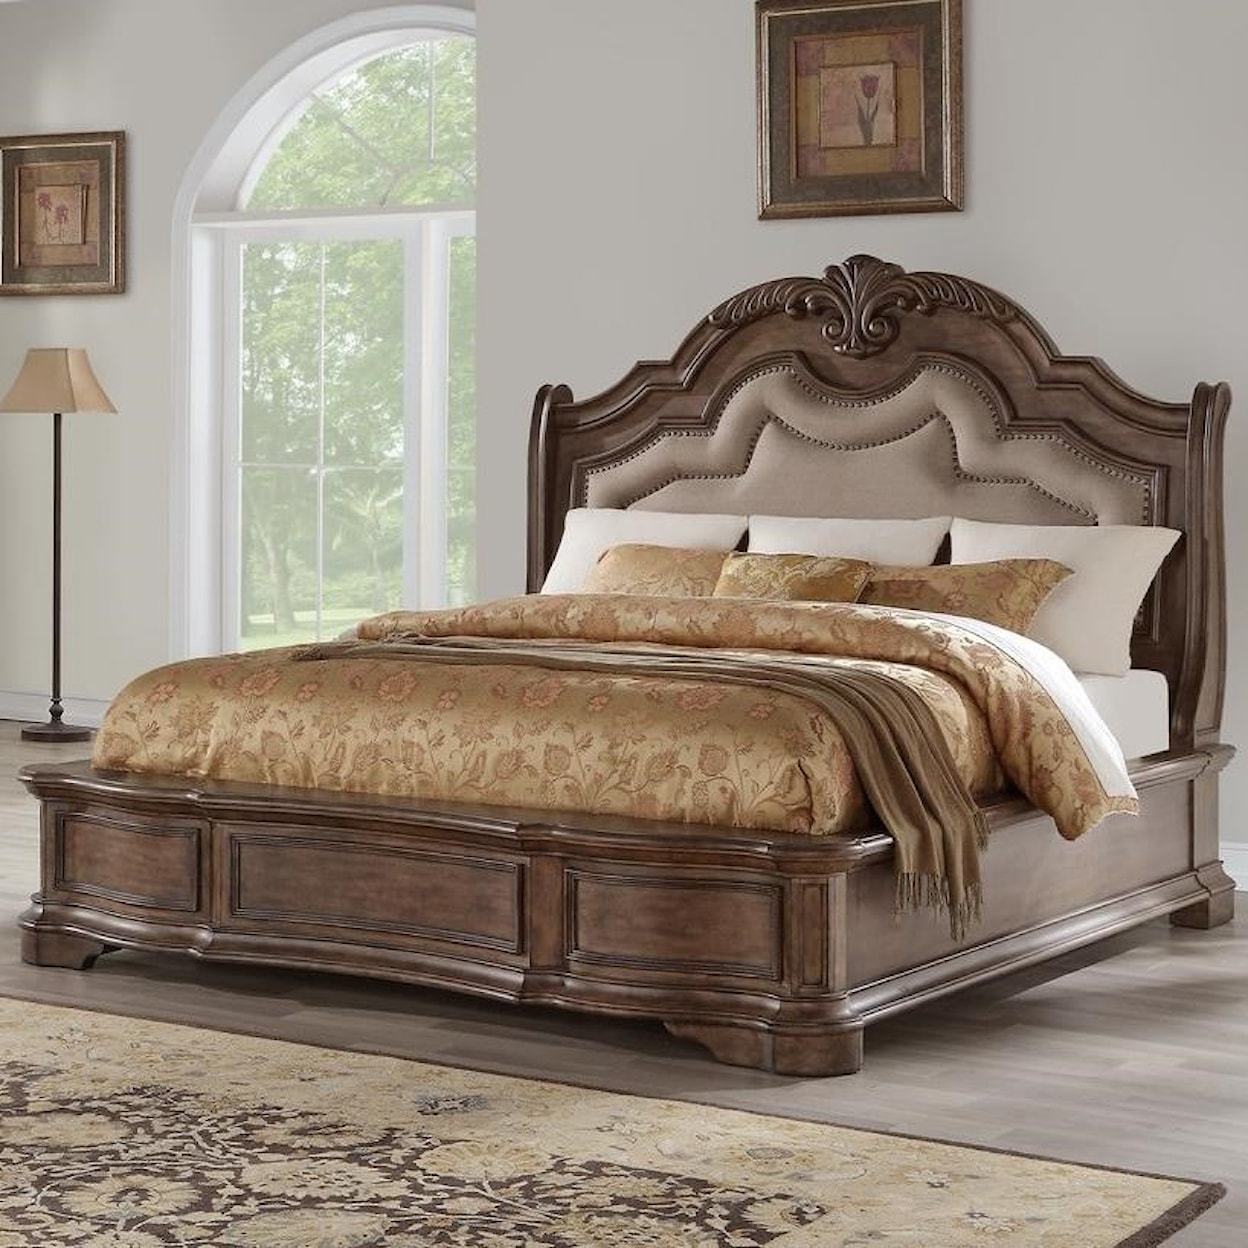 Avalon Tulsa Queen Upholstered Bed